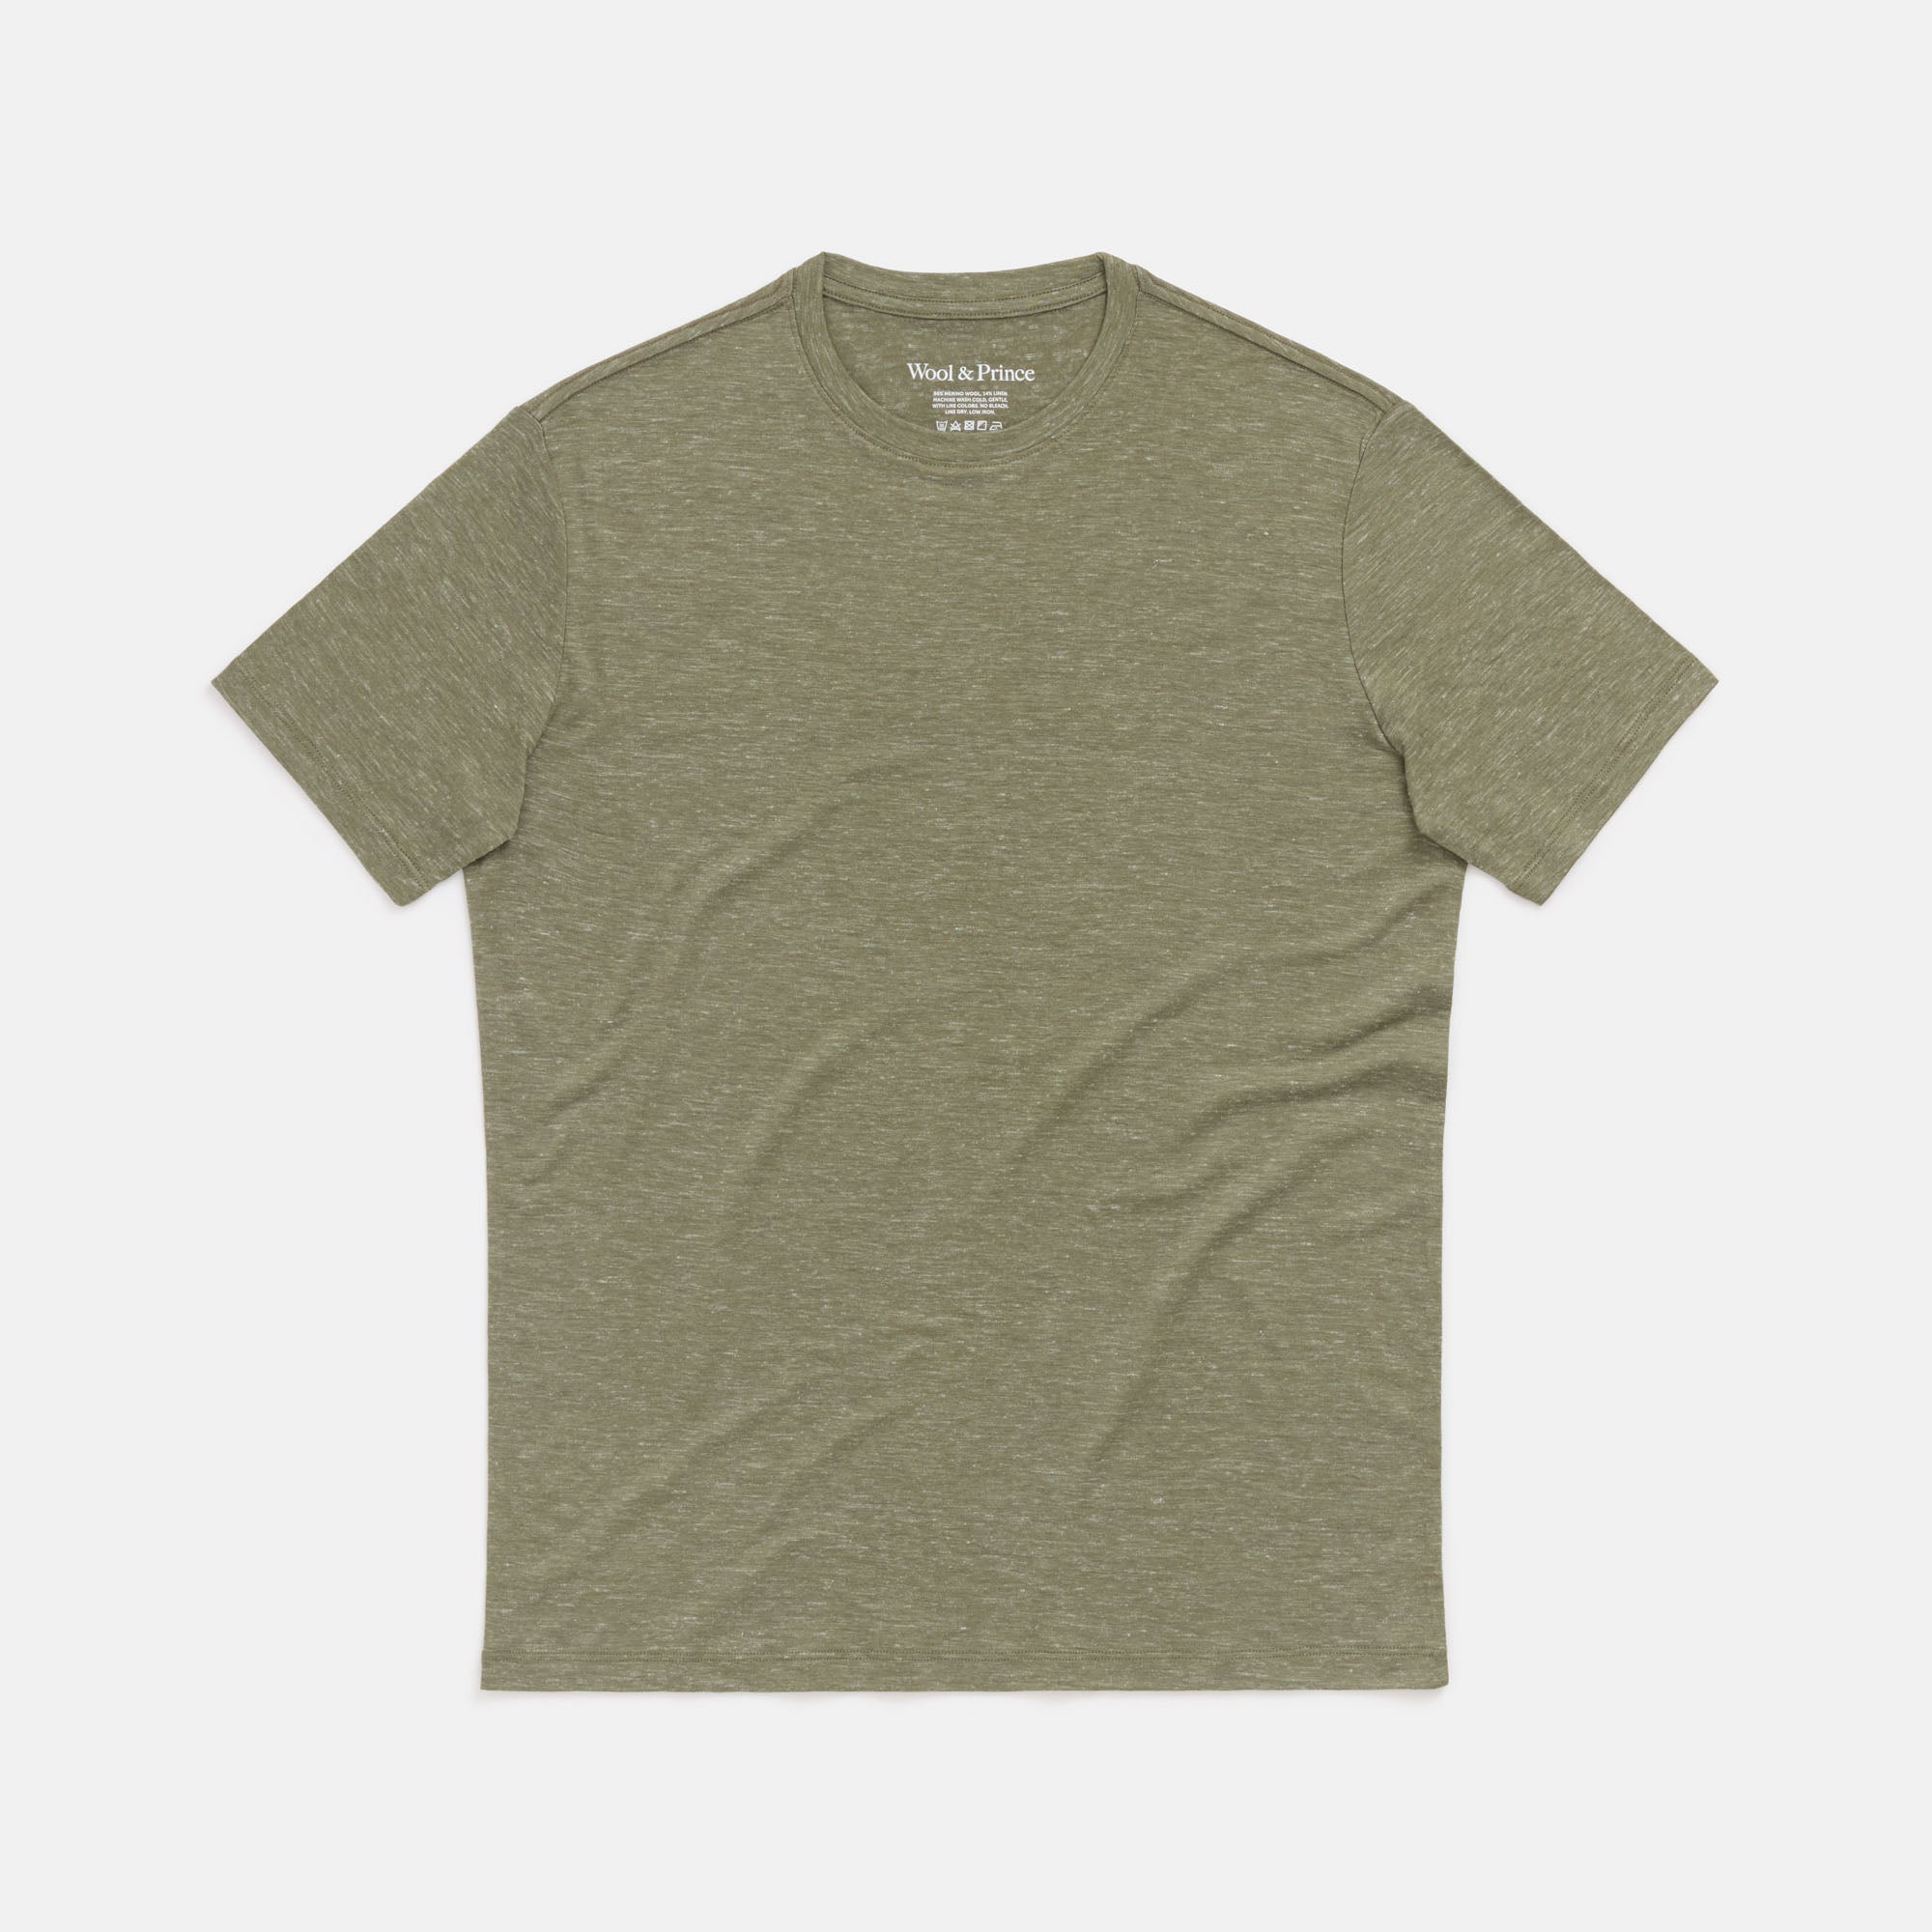 Linen Crew Neck T-Shirt | Cool Olive | Wool&Prince